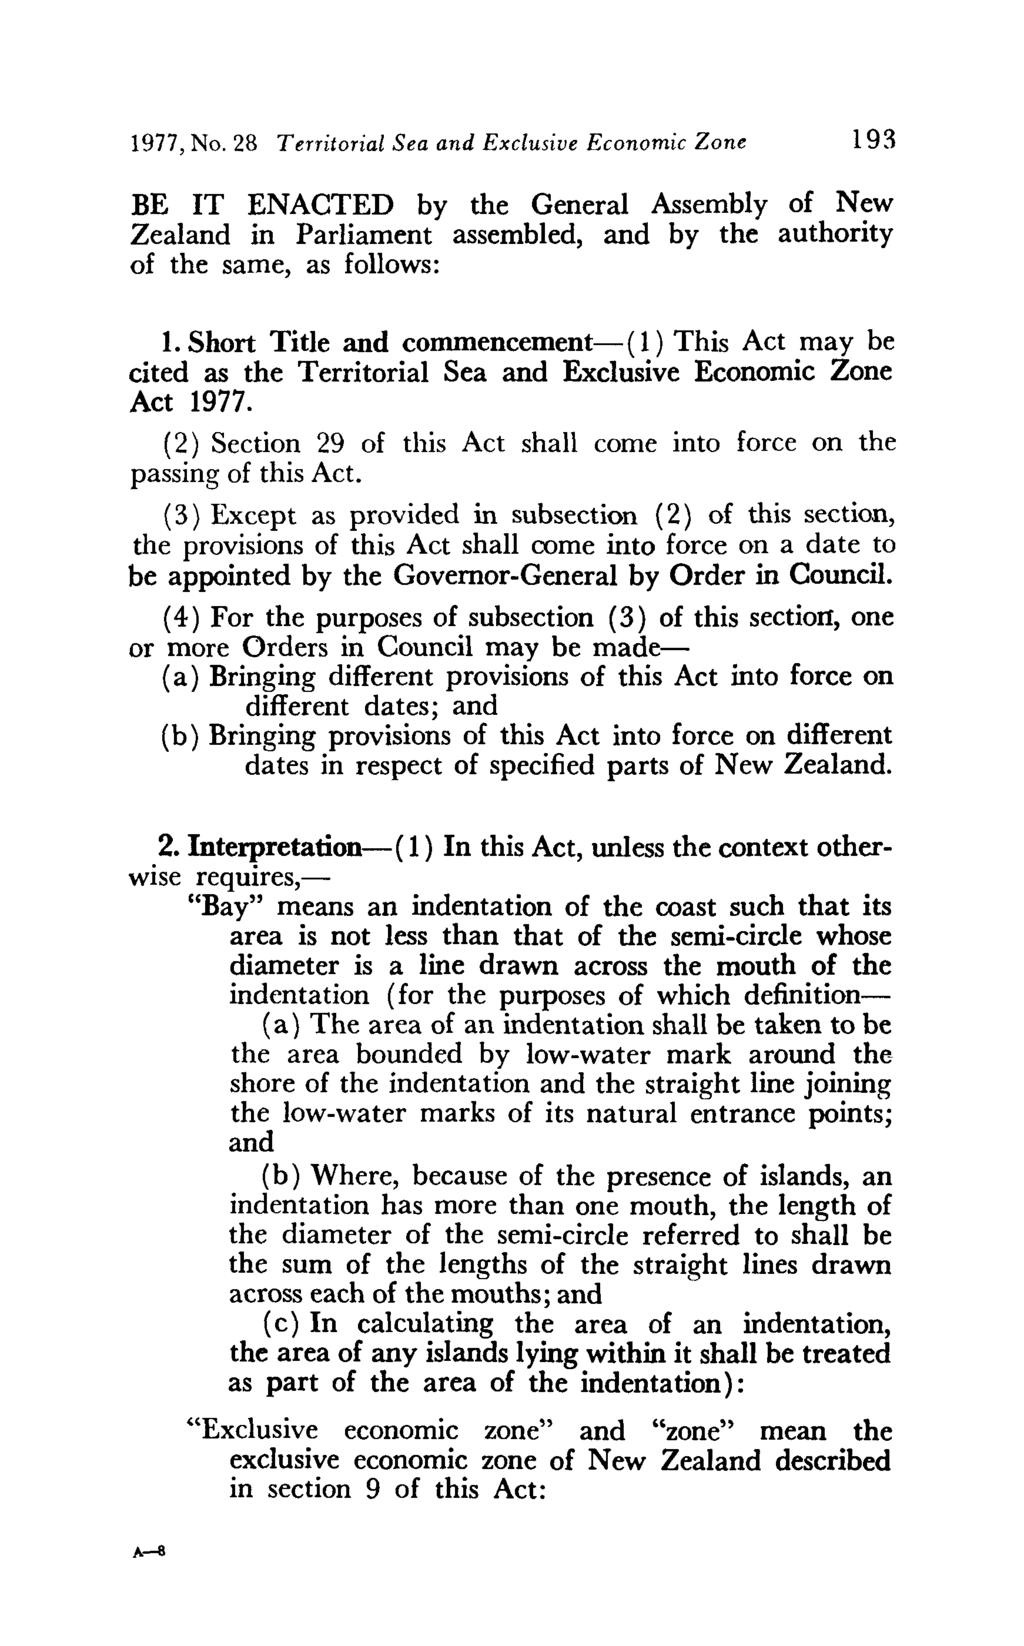 1977, No. 28 Territorial Sea and Exclusive Economic Zone 193 BE IT ENACTED by the General Assembly of New Zealand in Parliament assembled, and by the authority of the same, as follows: 1.